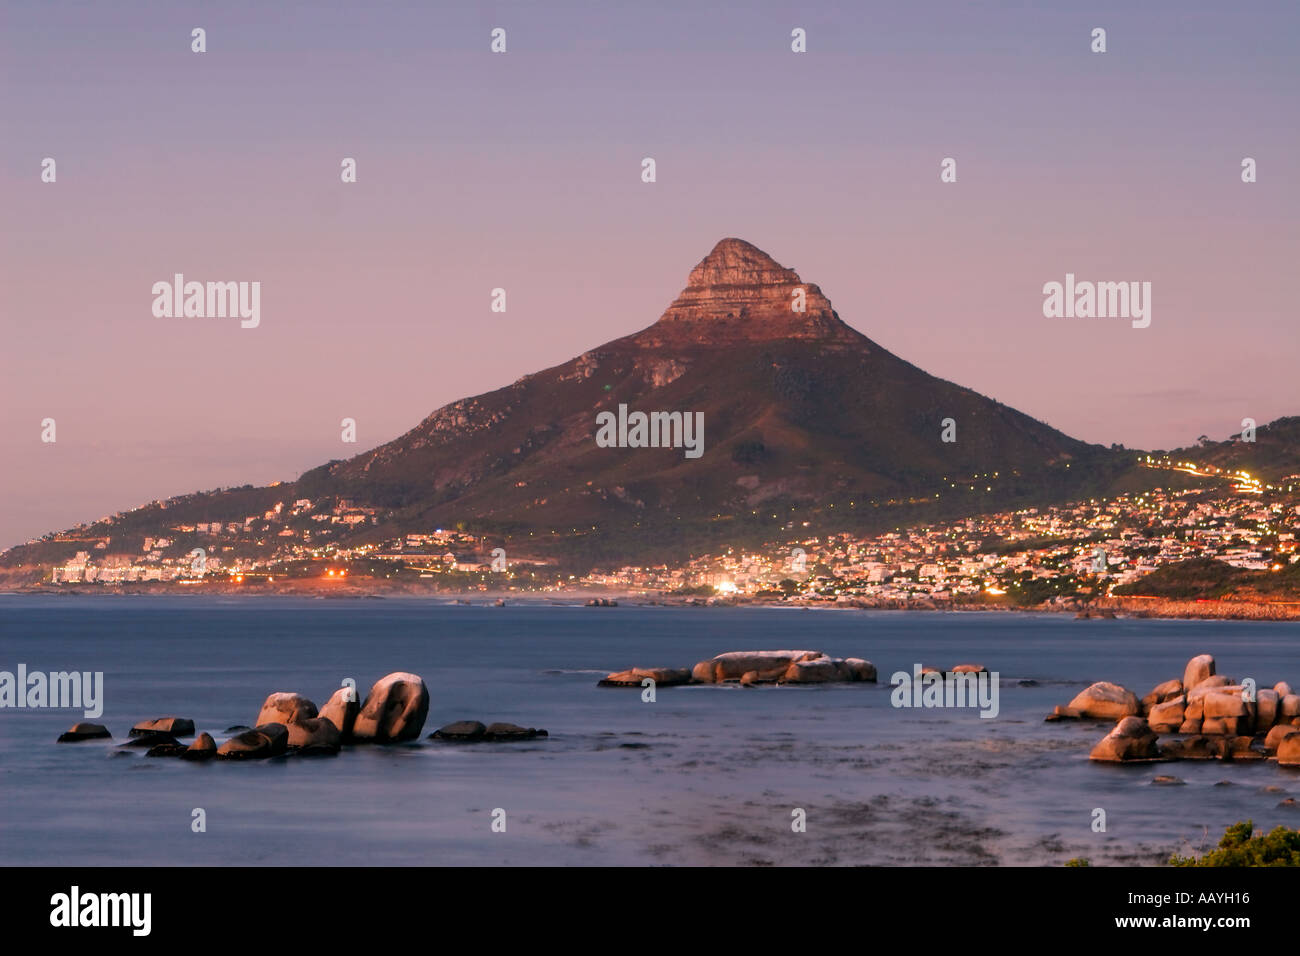 south africa near cape town Camps Bay Lions Head Stock Photo